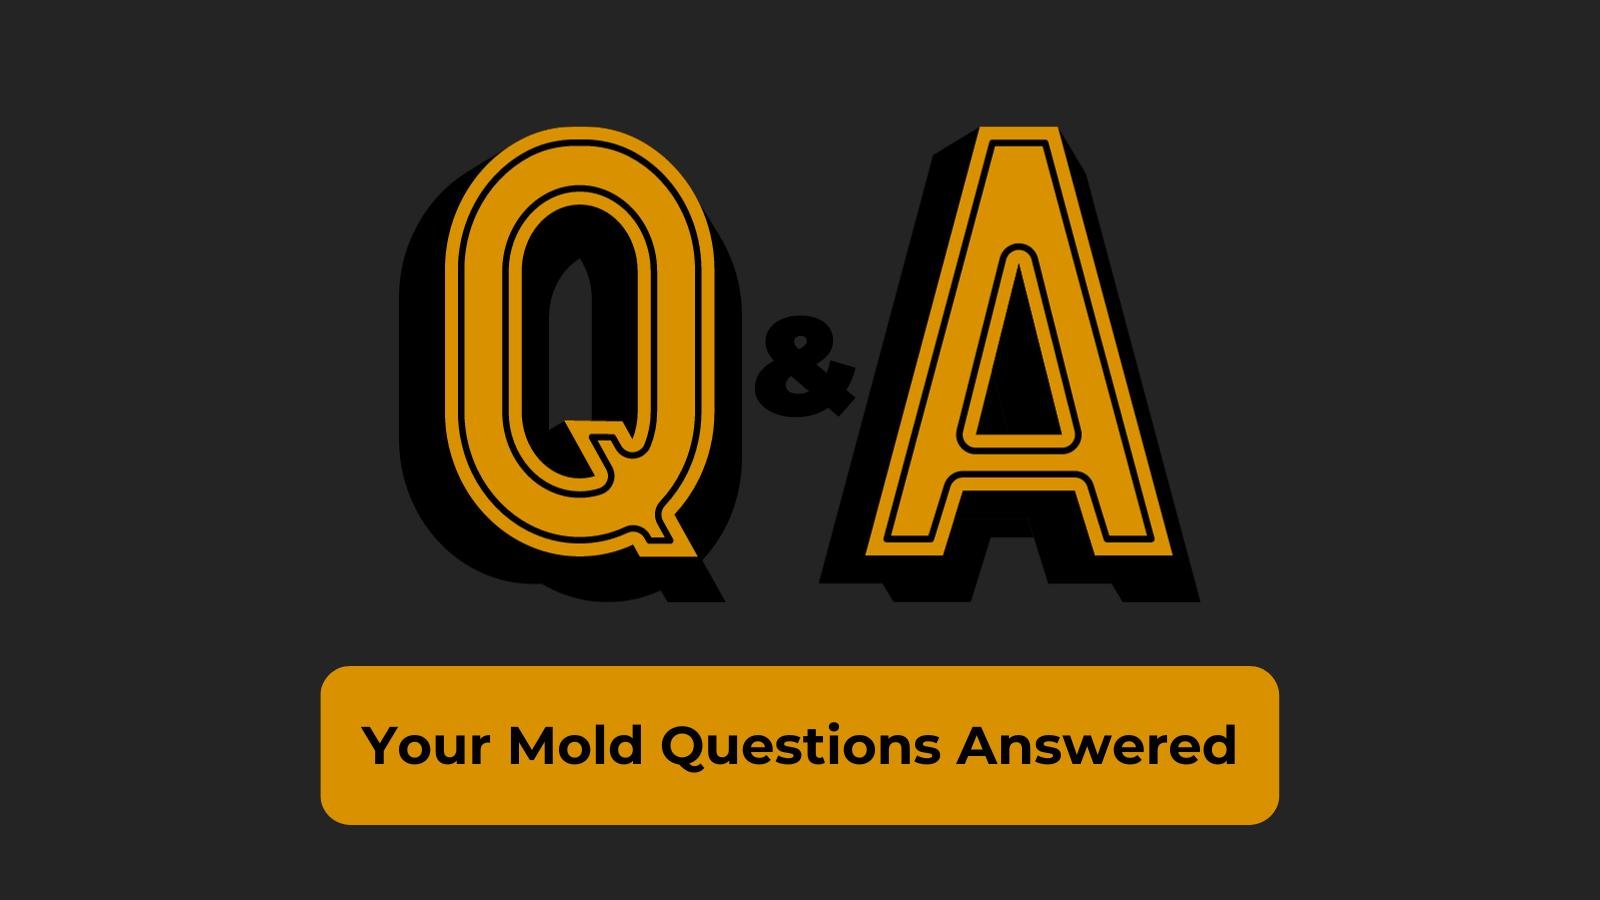 Expert Q&A session about mold